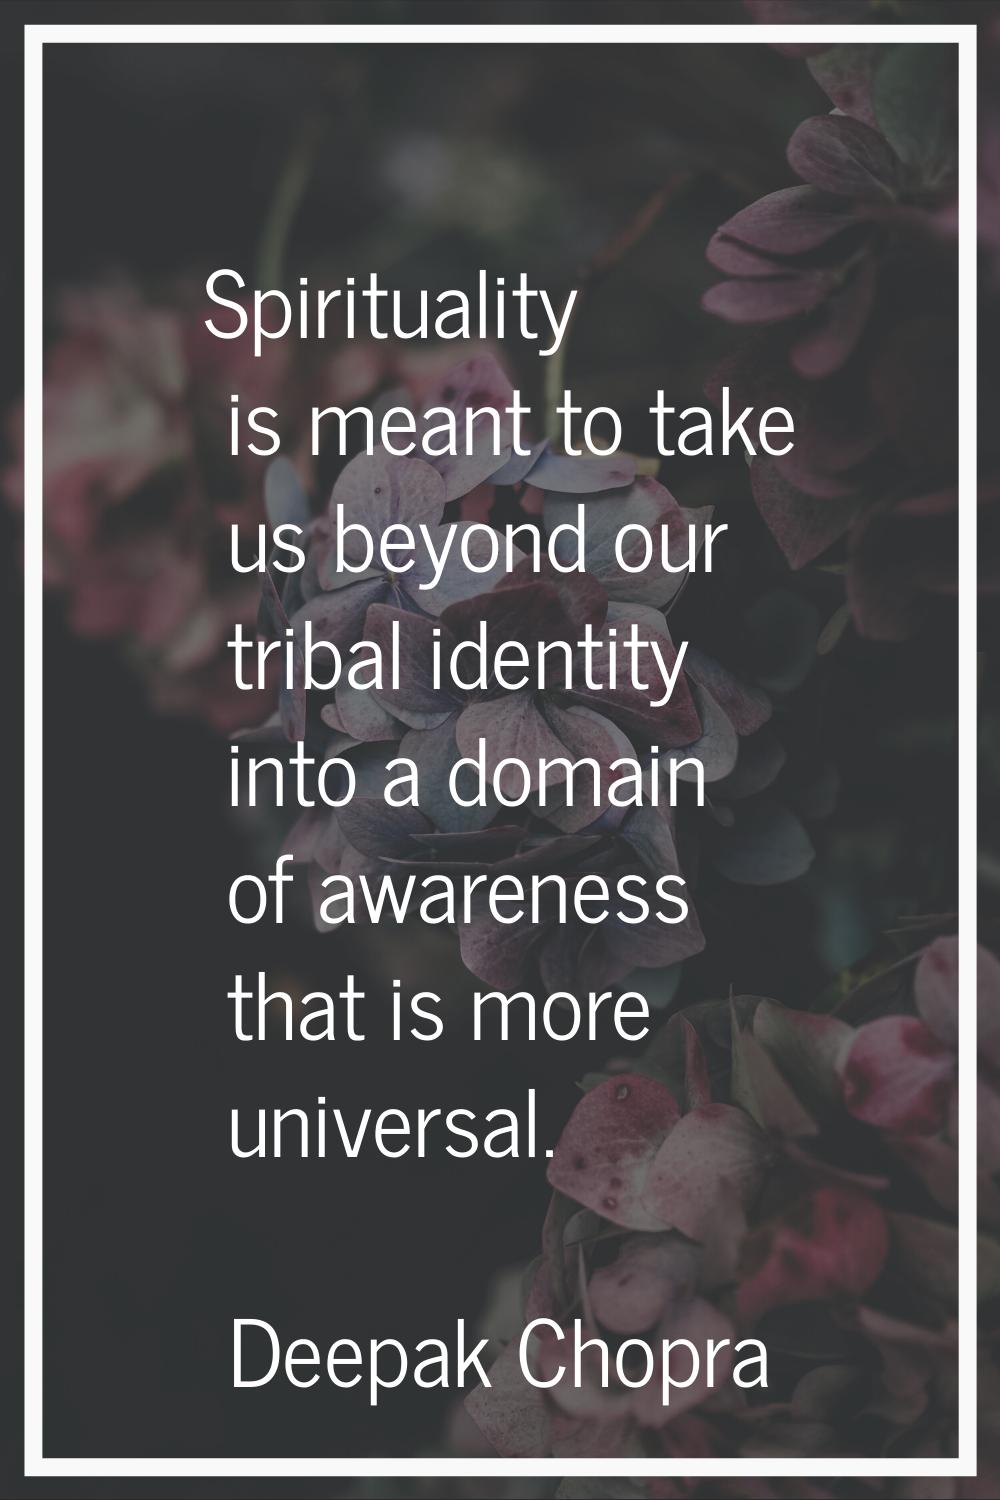 Spirituality is meant to take us beyond our tribal identity into a domain of awareness that is more